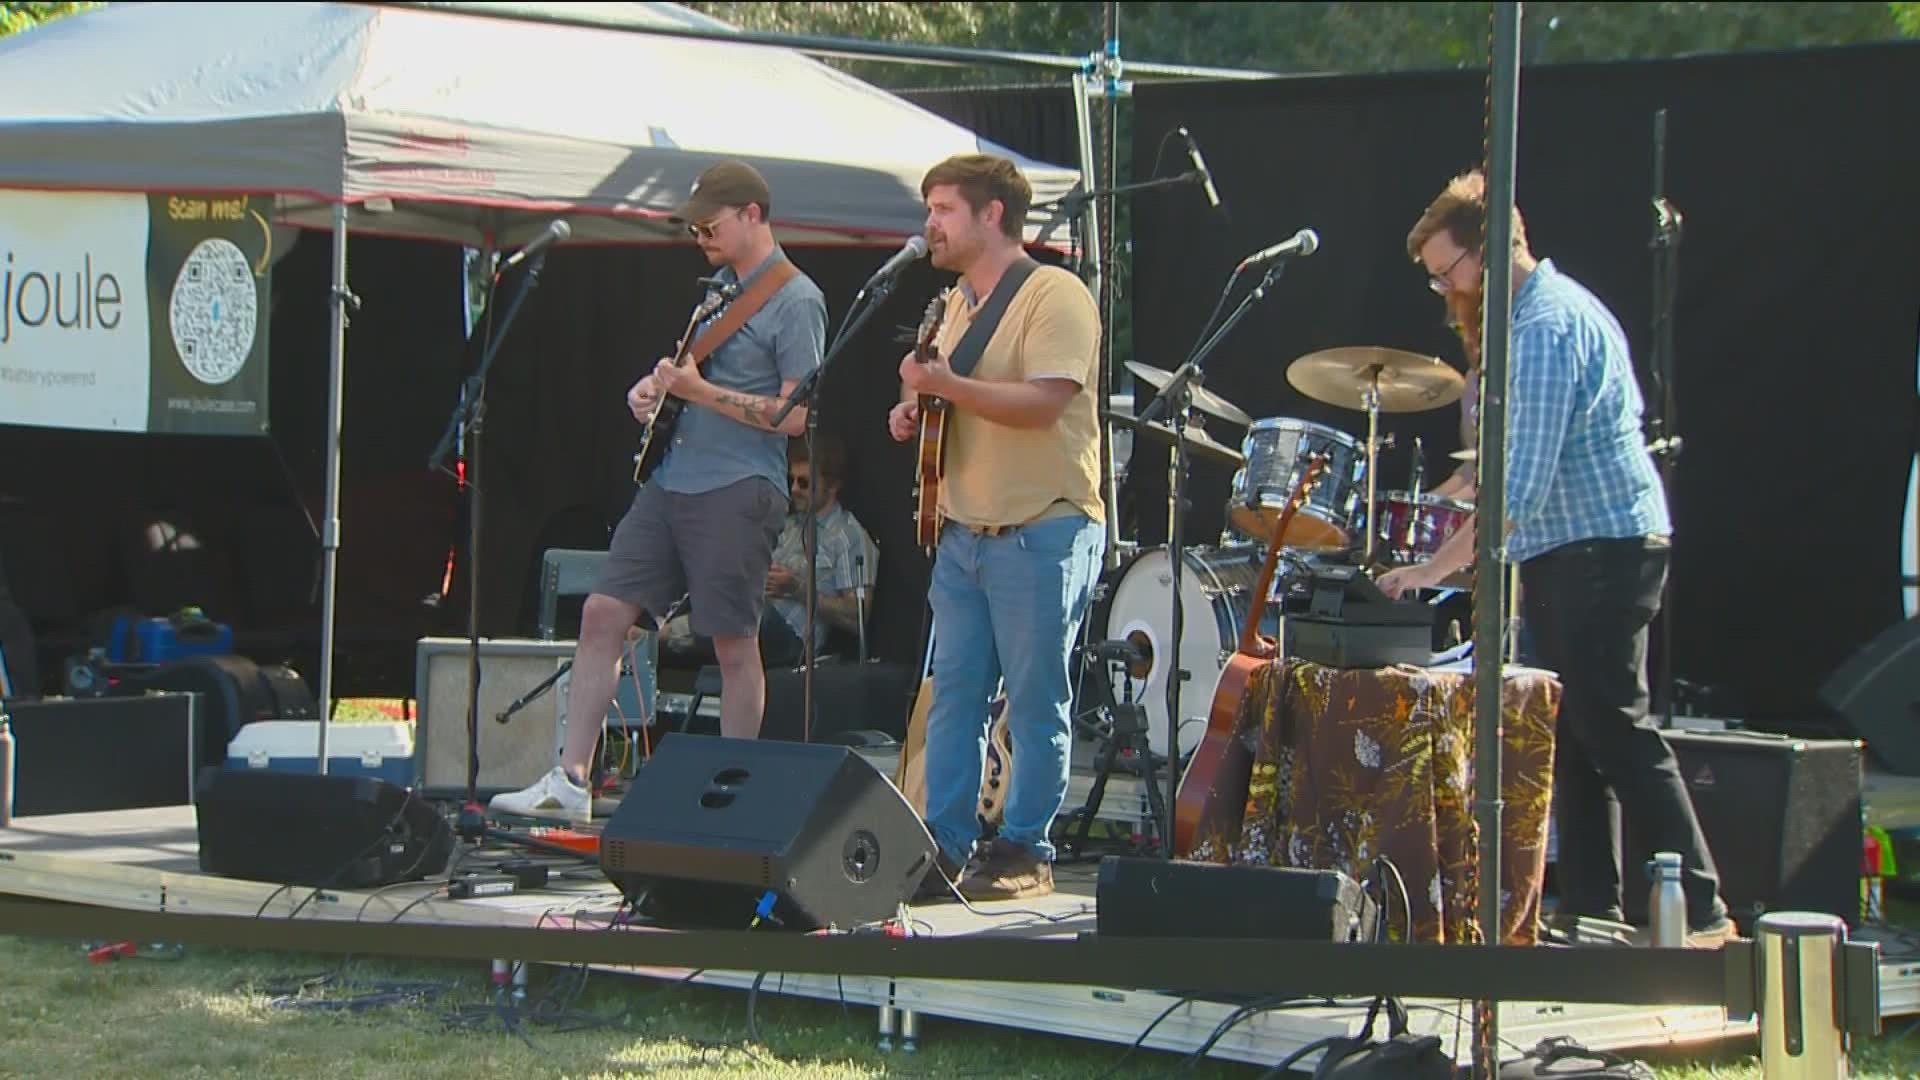 Every other Wednesday all summer long, the Morrison Center will be bringing music to local parks. The next show is set for July 13 at Peppermint Park.